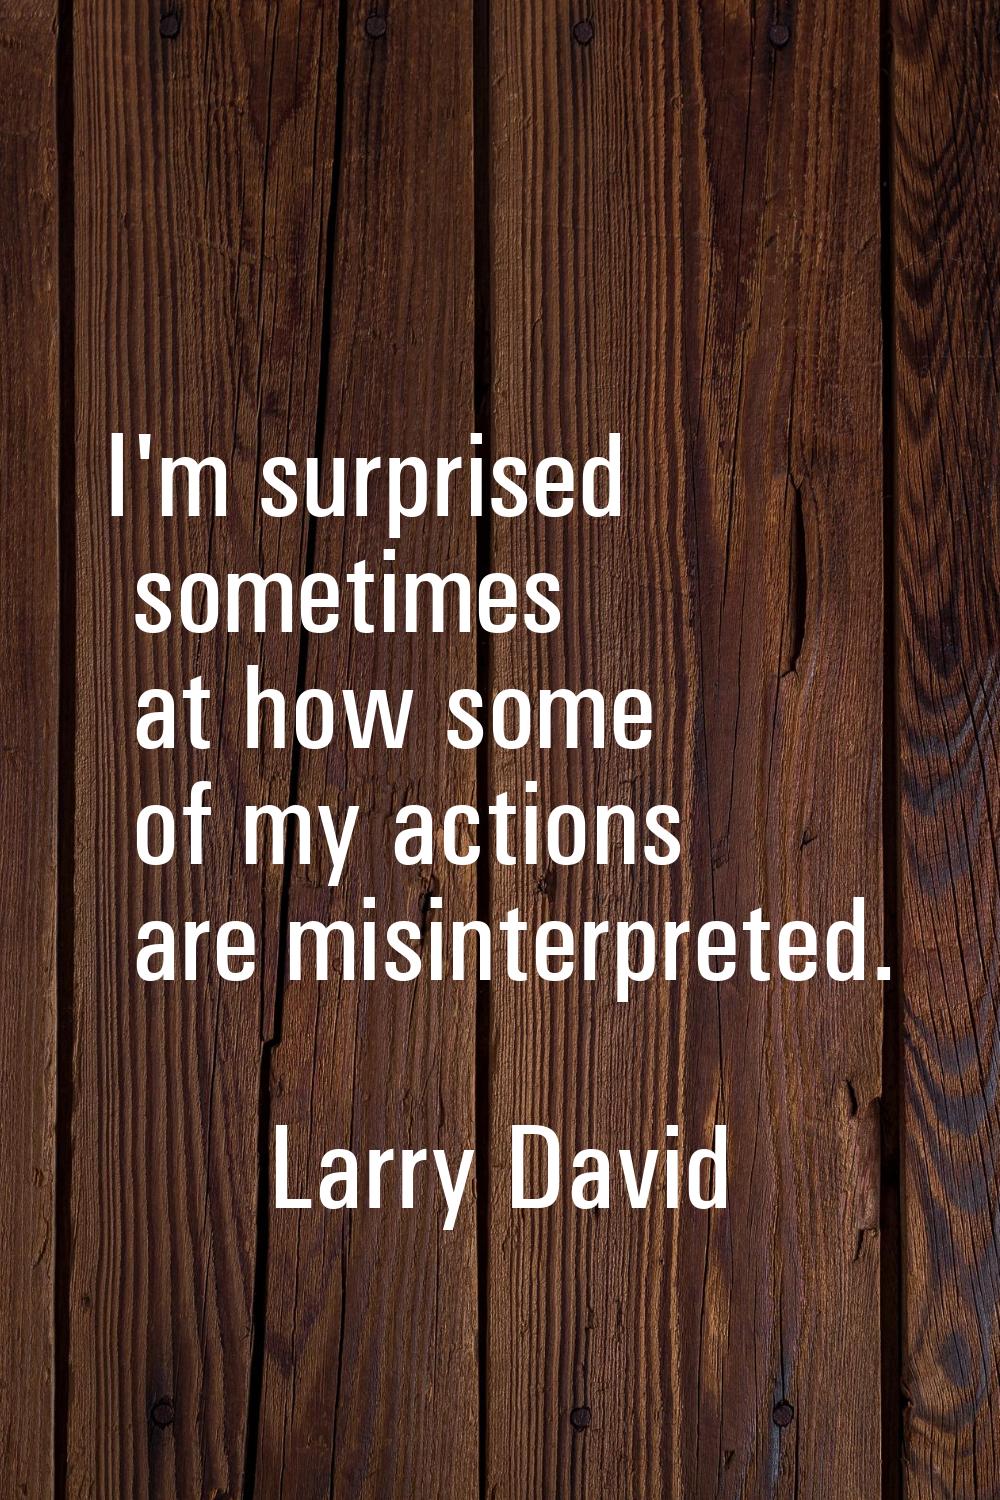 I'm surprised sometimes at how some of my actions are misinterpreted.